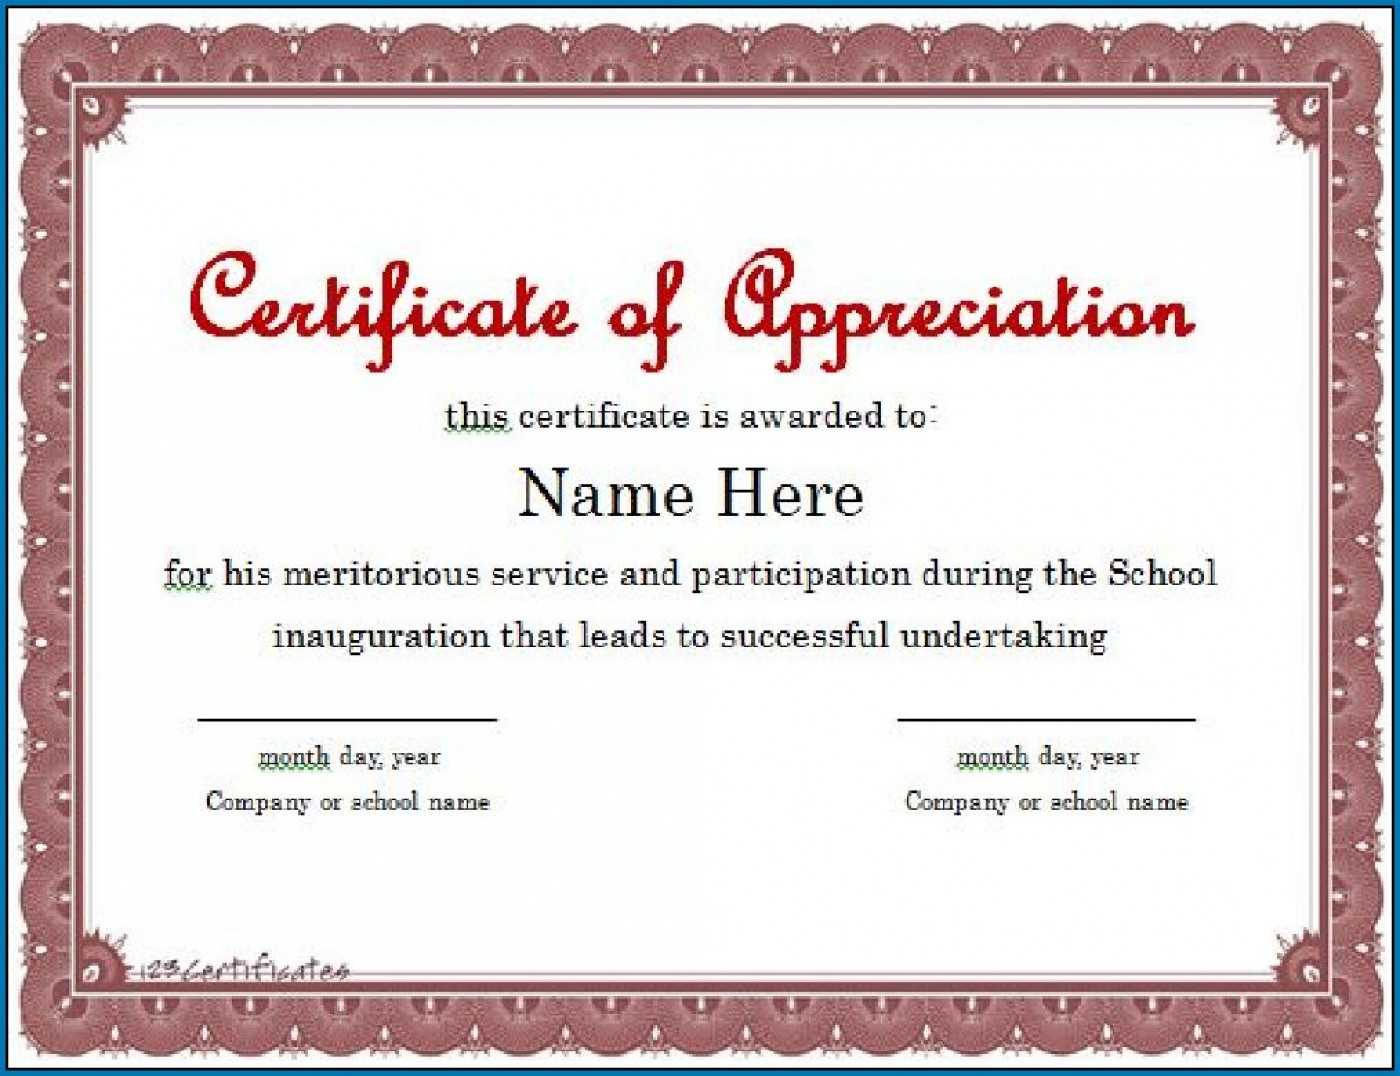 016 Certificate Of Appreciation Templates Free Powerpoint With Regard To Certificate Of Participation Template Ppt